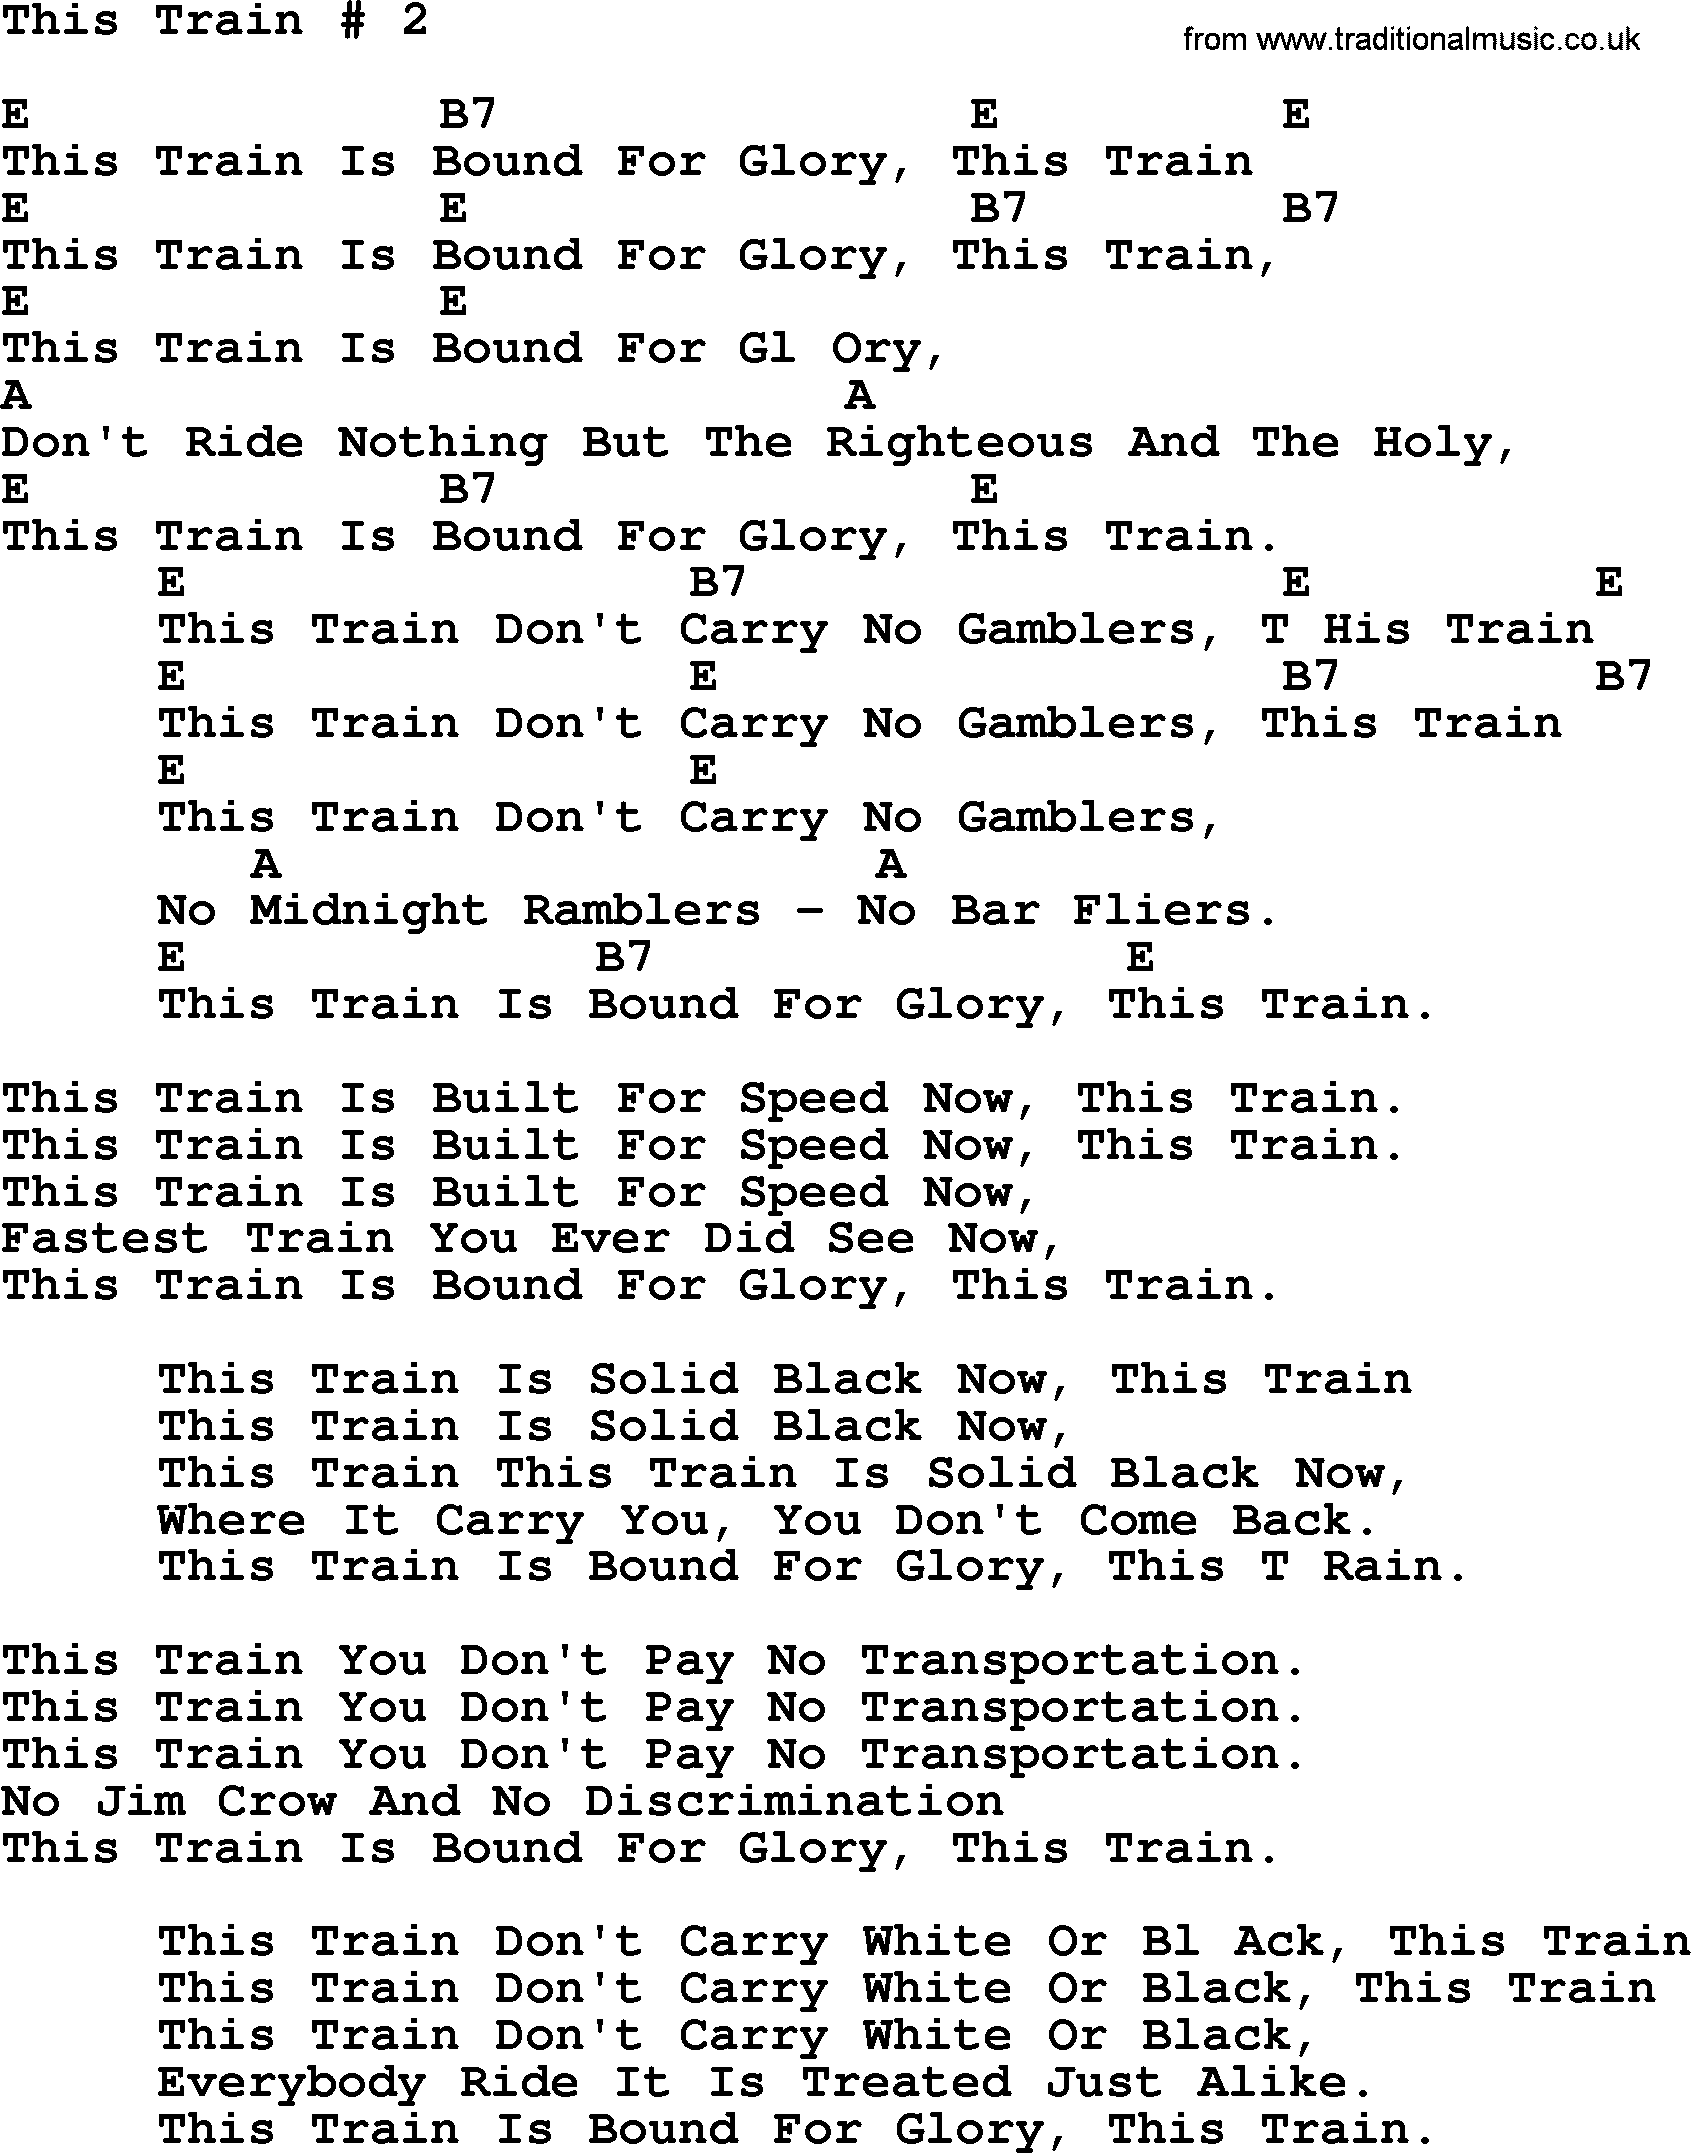 Peter, Paul and Mary song This Train 2, lyrics and chords